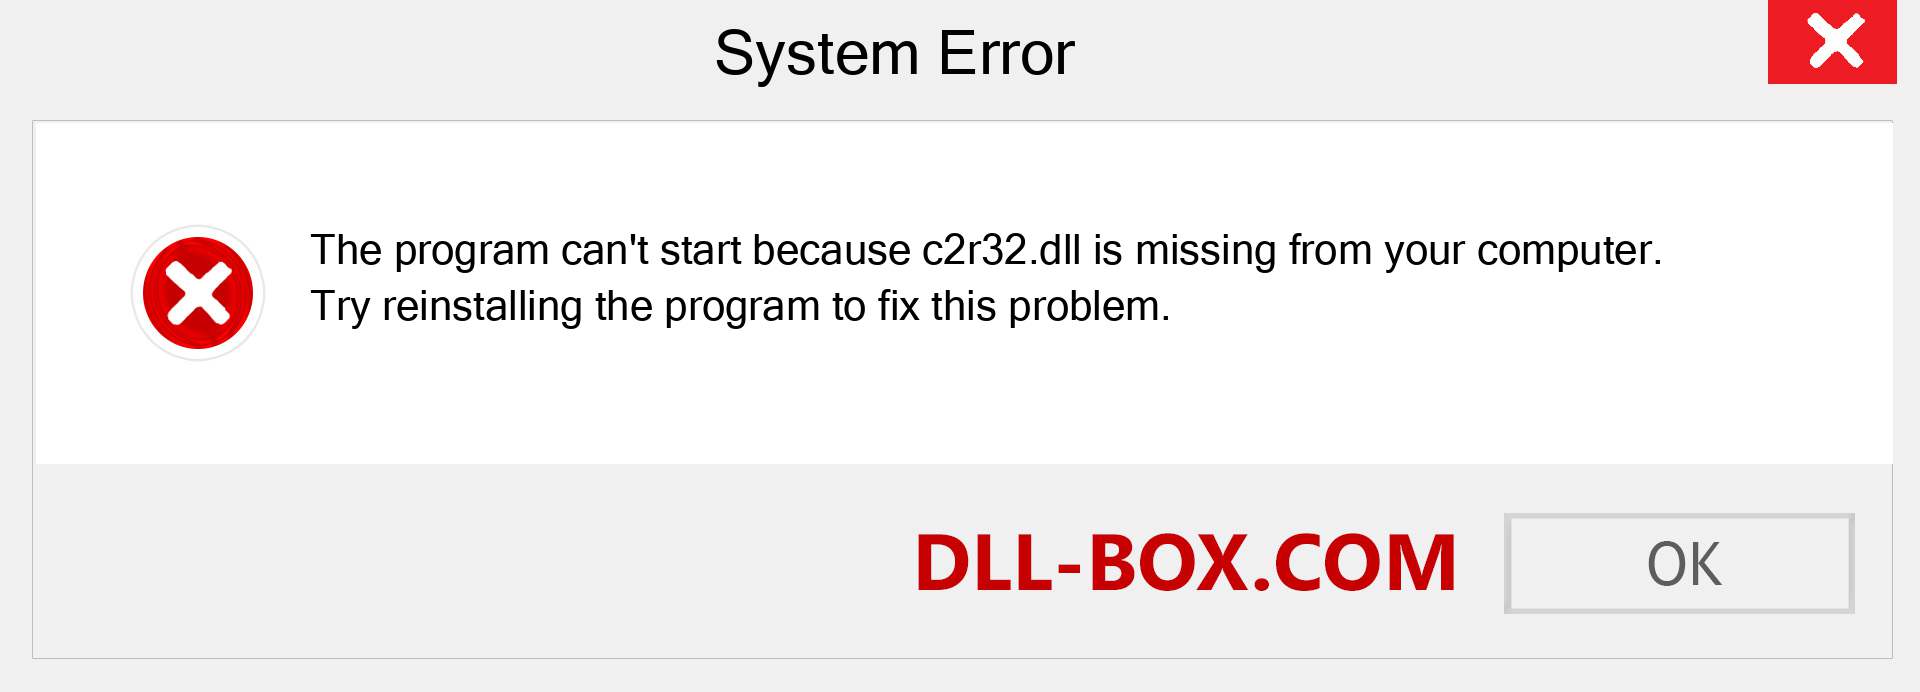  c2r32.dll file is missing?. Download for Windows 7, 8, 10 - Fix  c2r32 dll Missing Error on Windows, photos, images